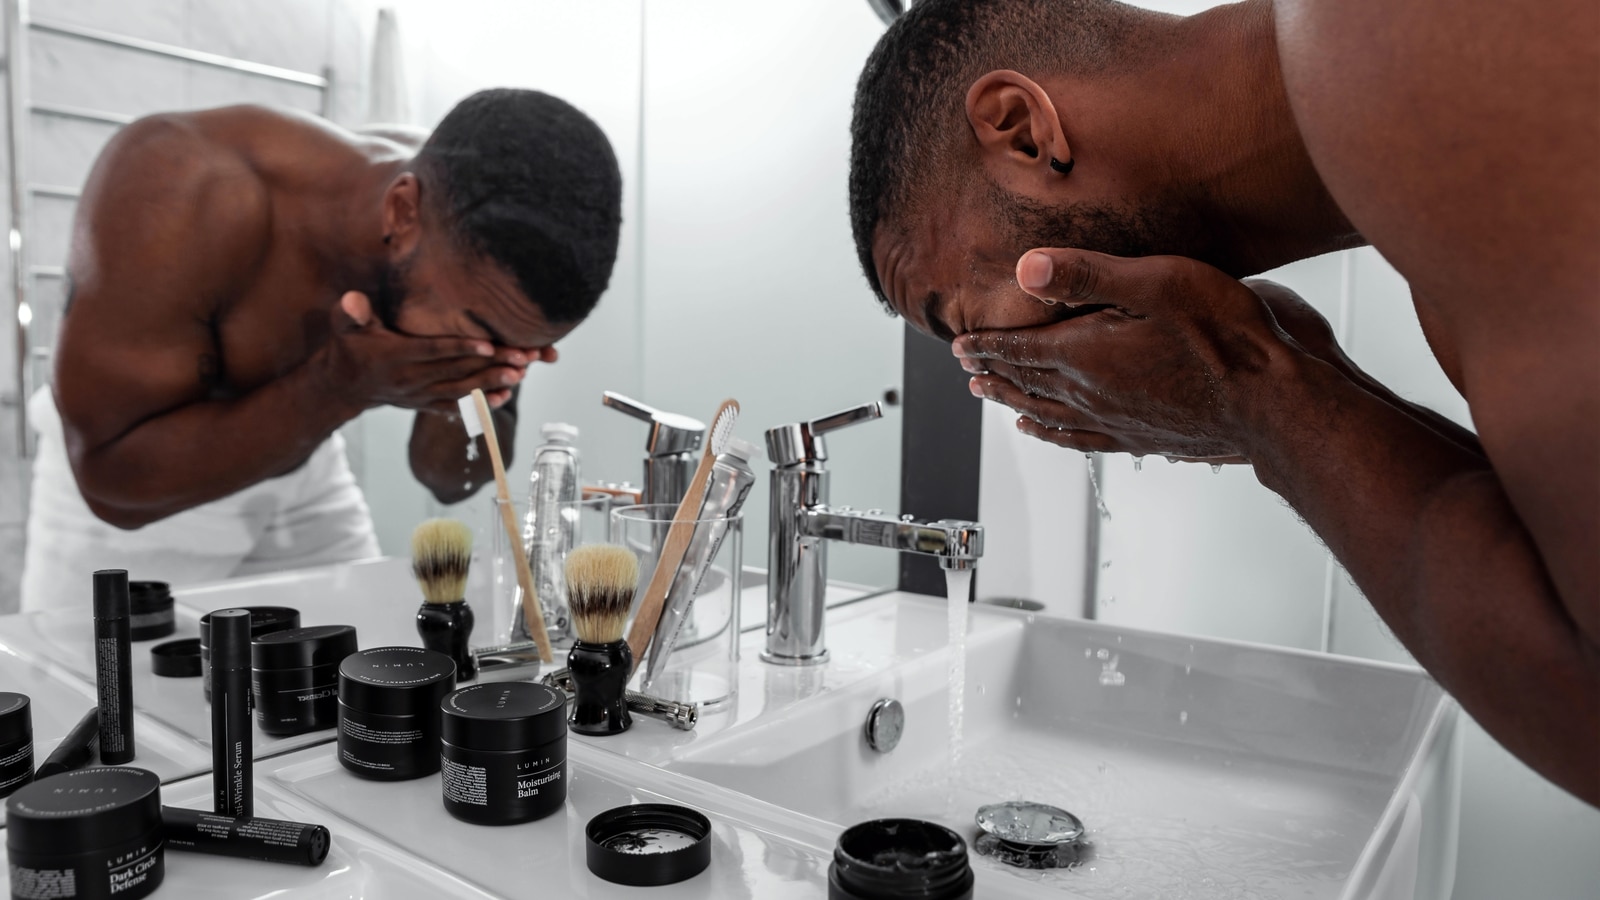 Skincare routine for men: Experts share basic tips to achieve a refreshed look | Fashion Trends